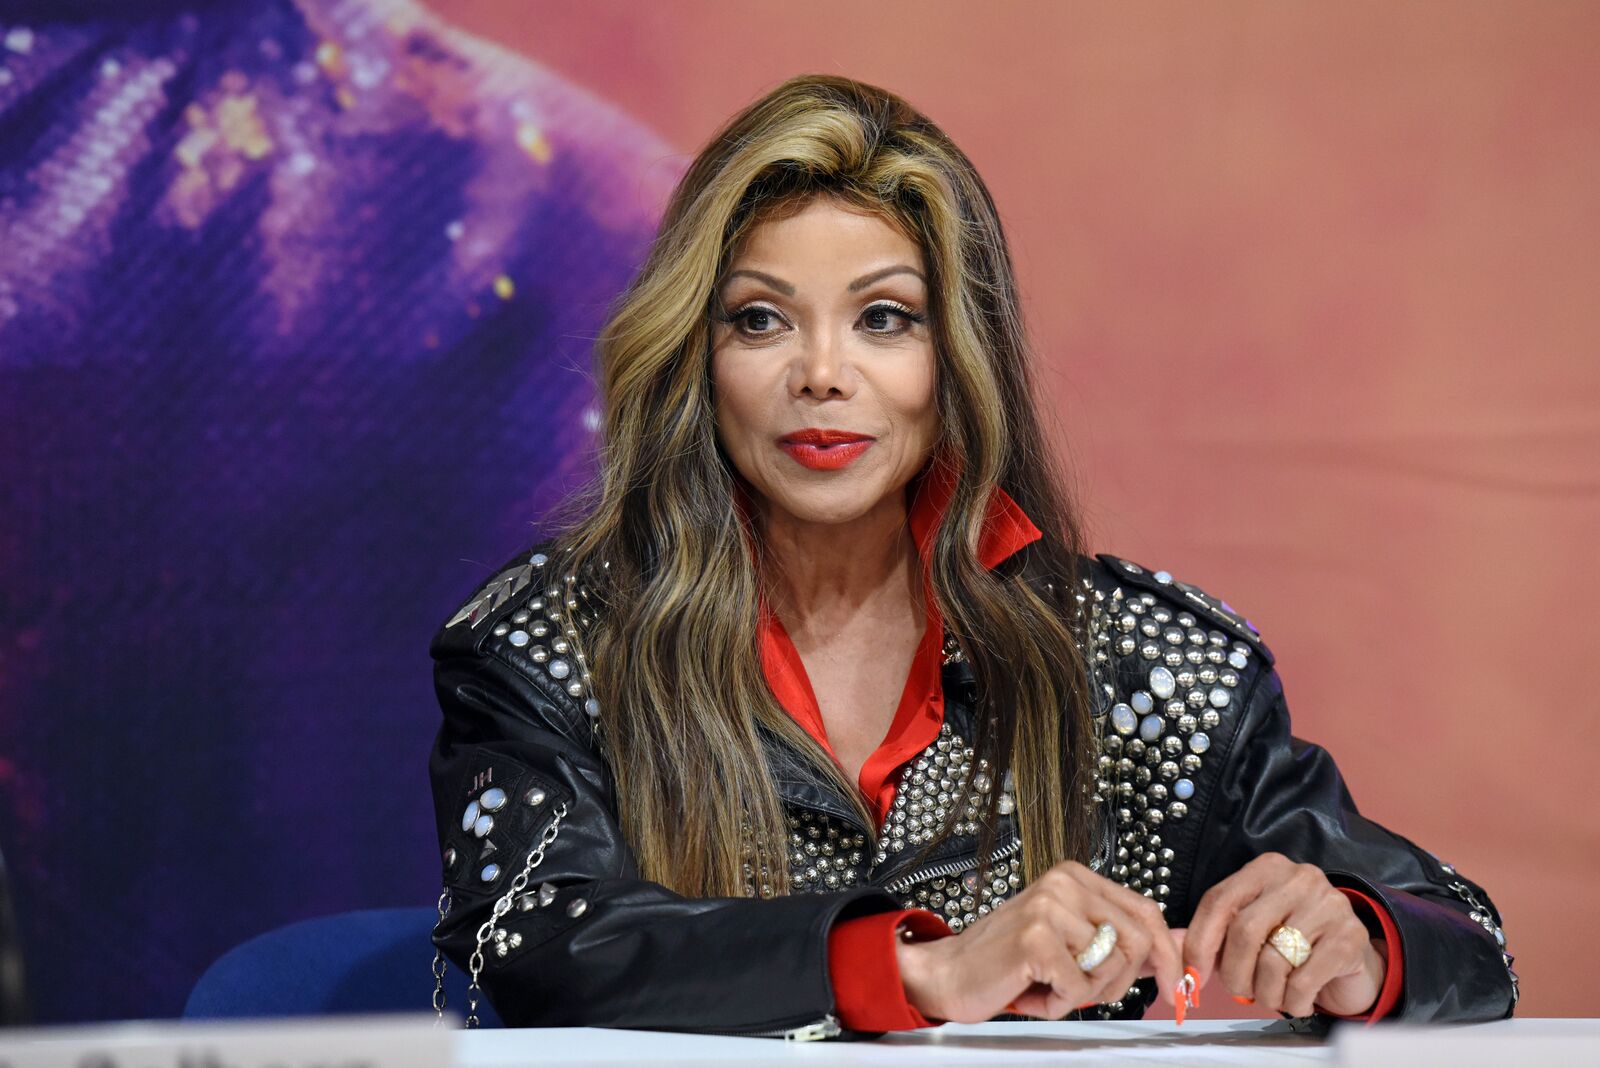 La Toya Jackson Celebrates 64th Birthday and Gushes about Her Parents